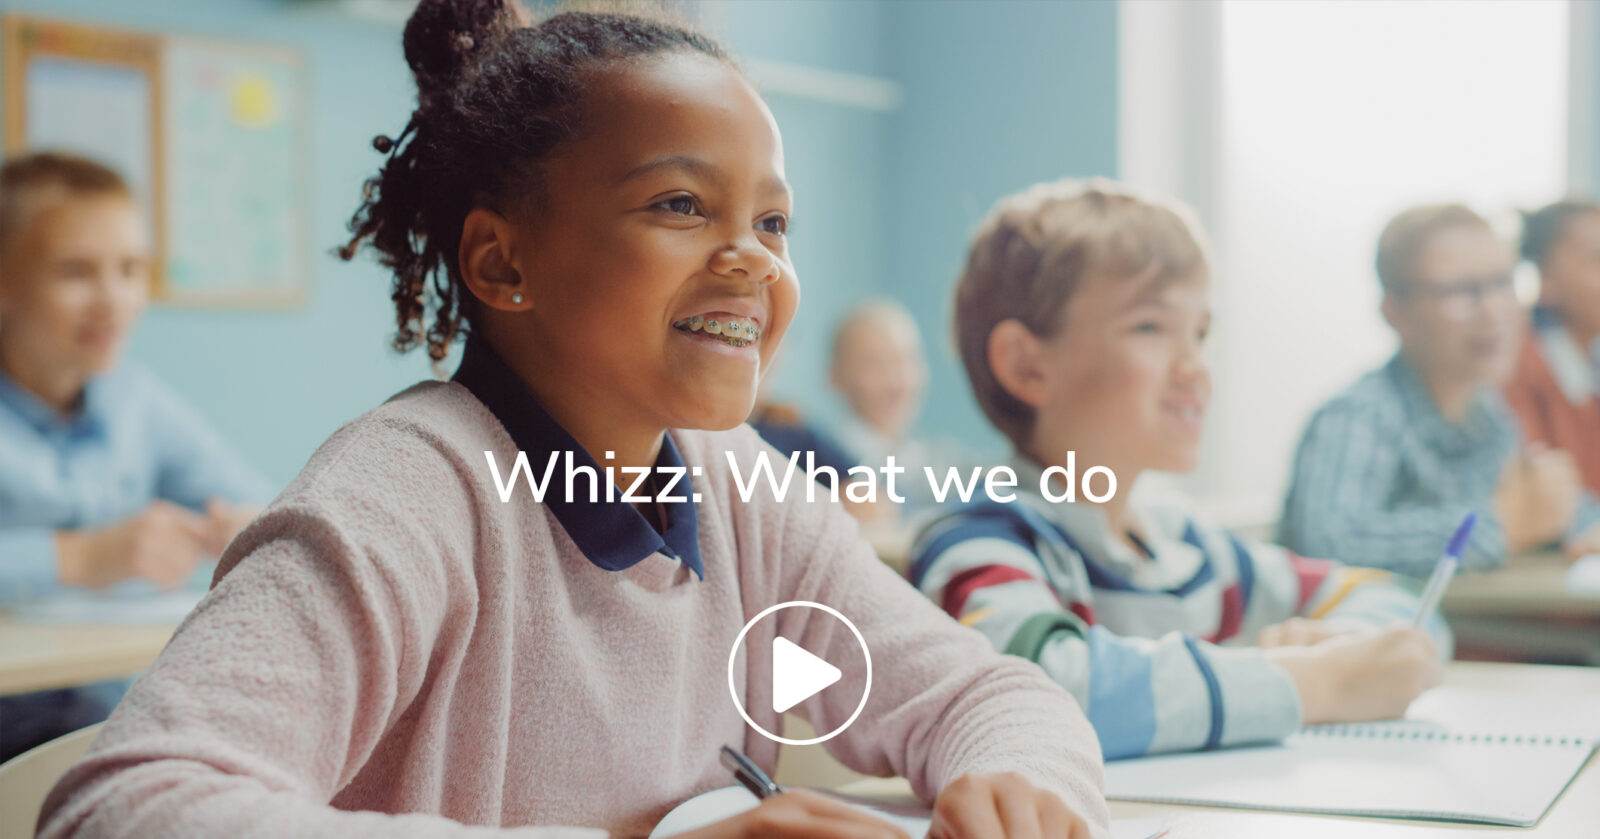 Whizz what we do video overlay